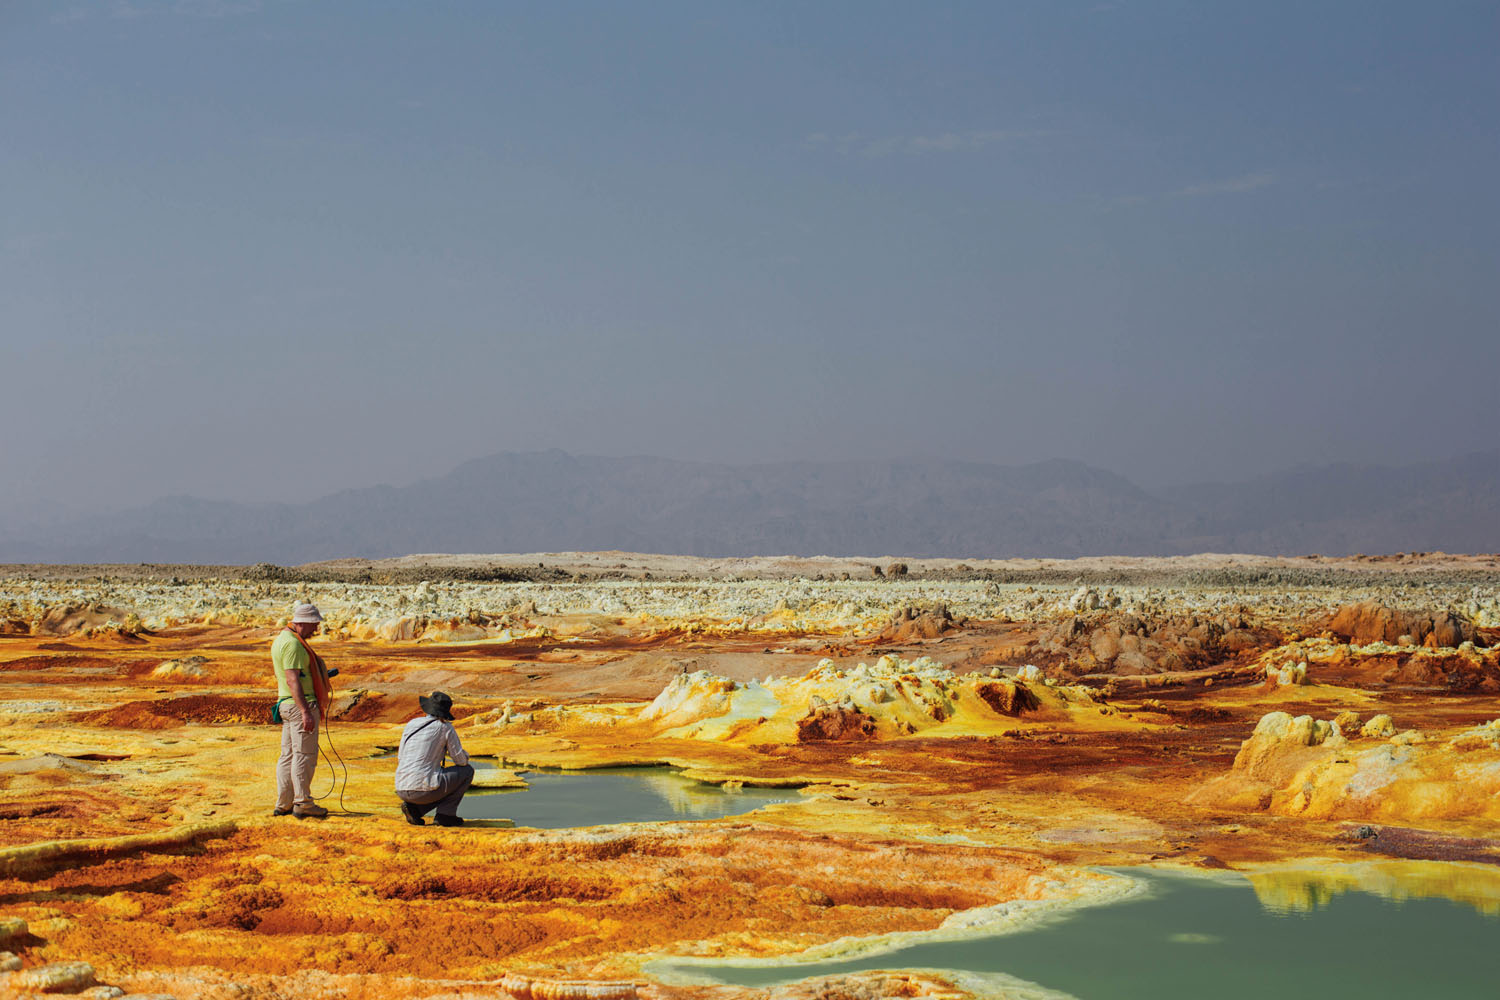 Dutch researchers kneel next to a sulfur pool at Dallol, Ethiopia. The extreme heat, acidity, and sulfur content at Dallol make it an excellent research site for scientists studying the limits of life, both here on Earth and elsewhere in the solar system. Photograph by Alex Pritz.